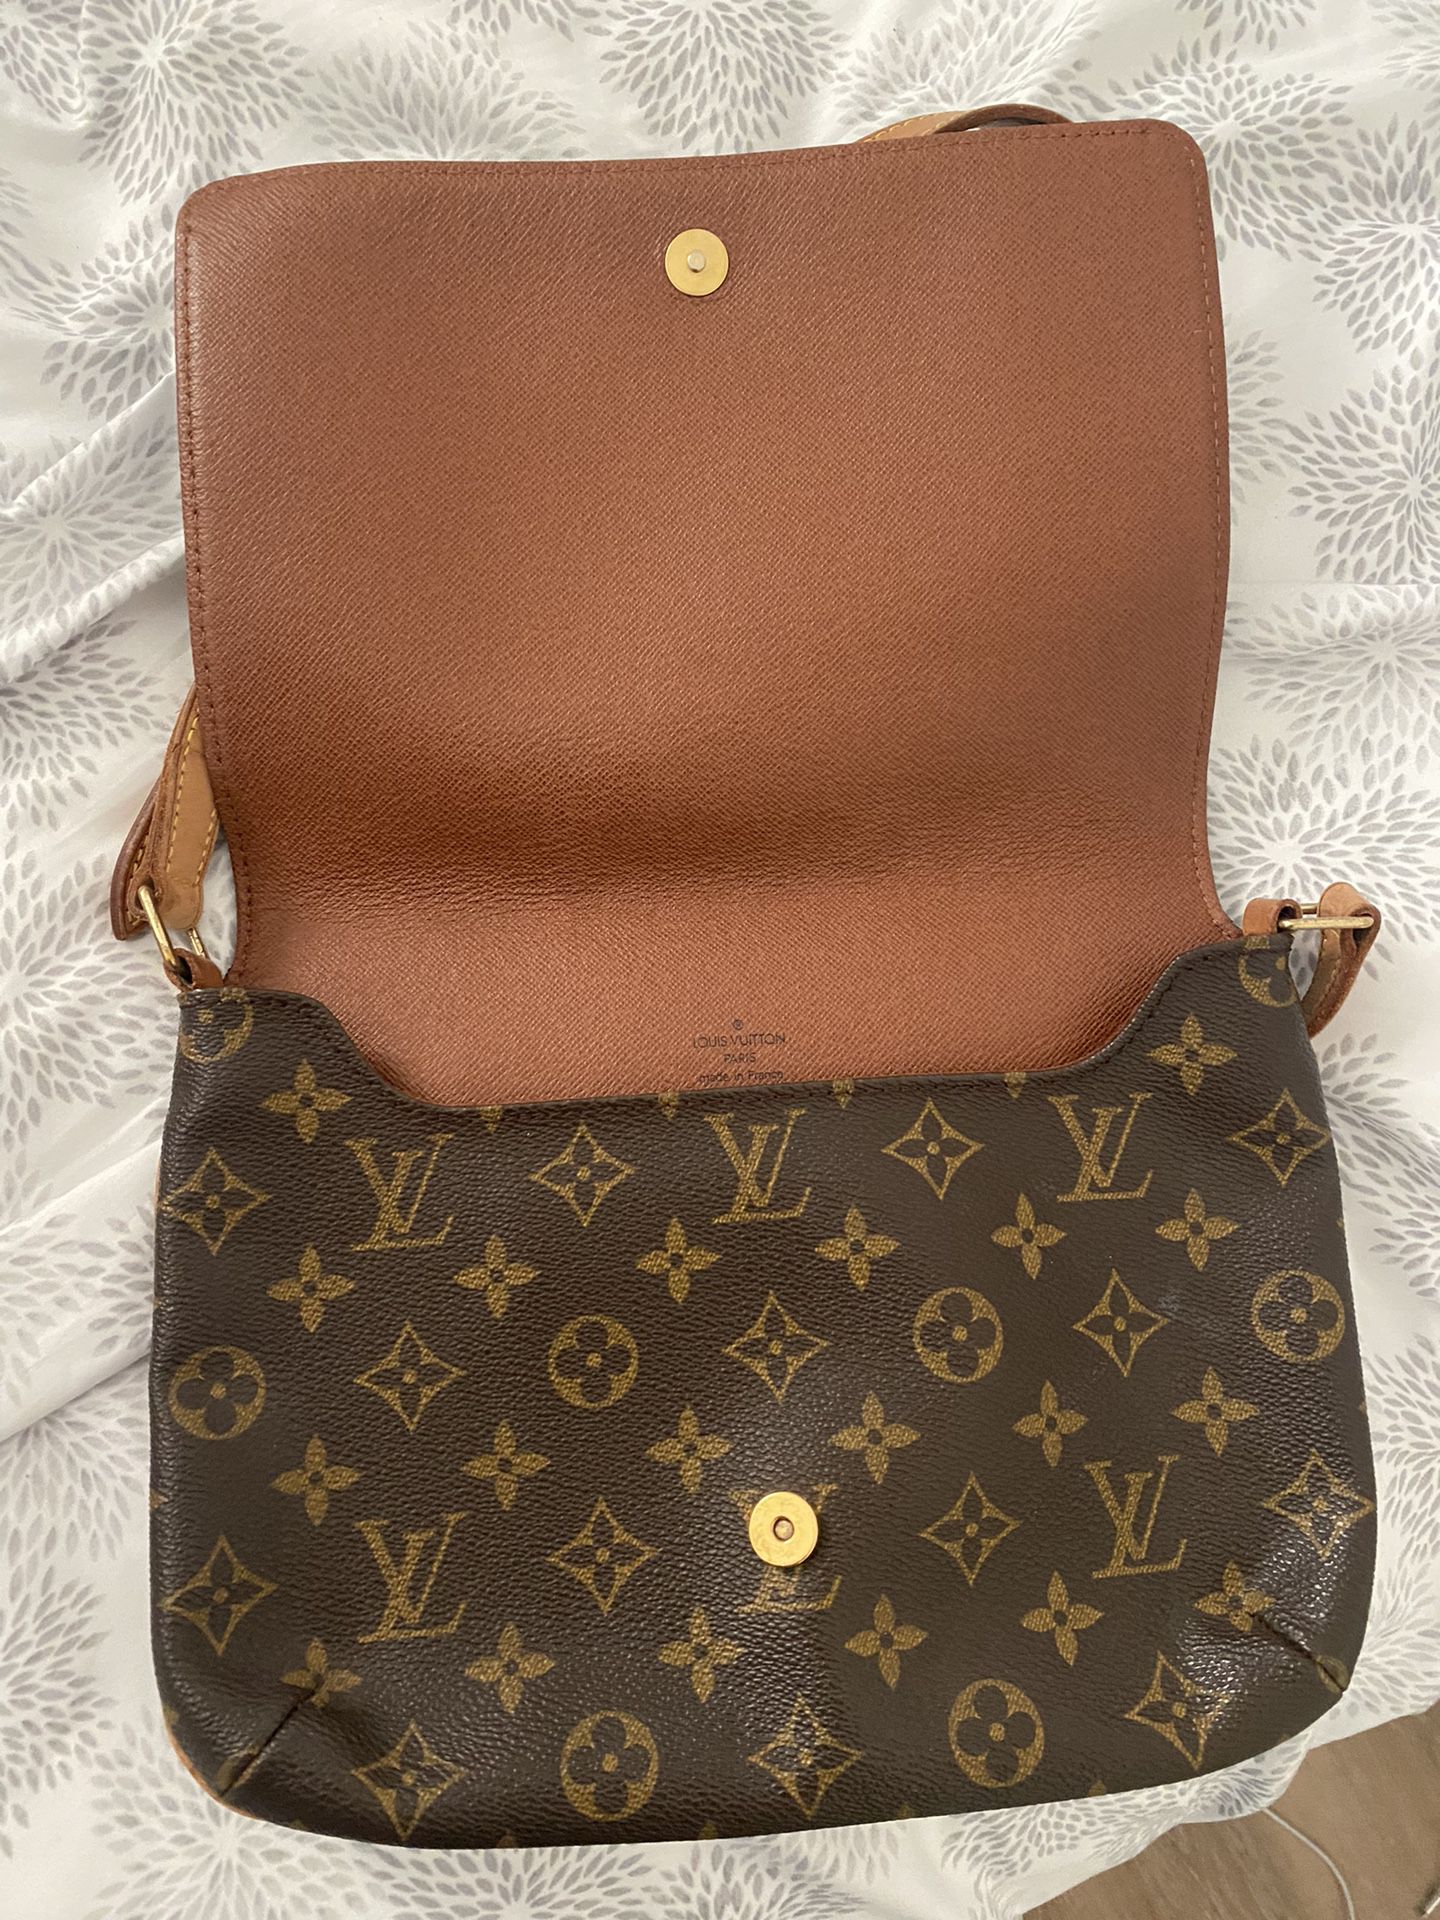 LV Authentic Locky BB Crossbody Purse FLASH SALE for Sale in Tinley Park,  IL - OfferUp